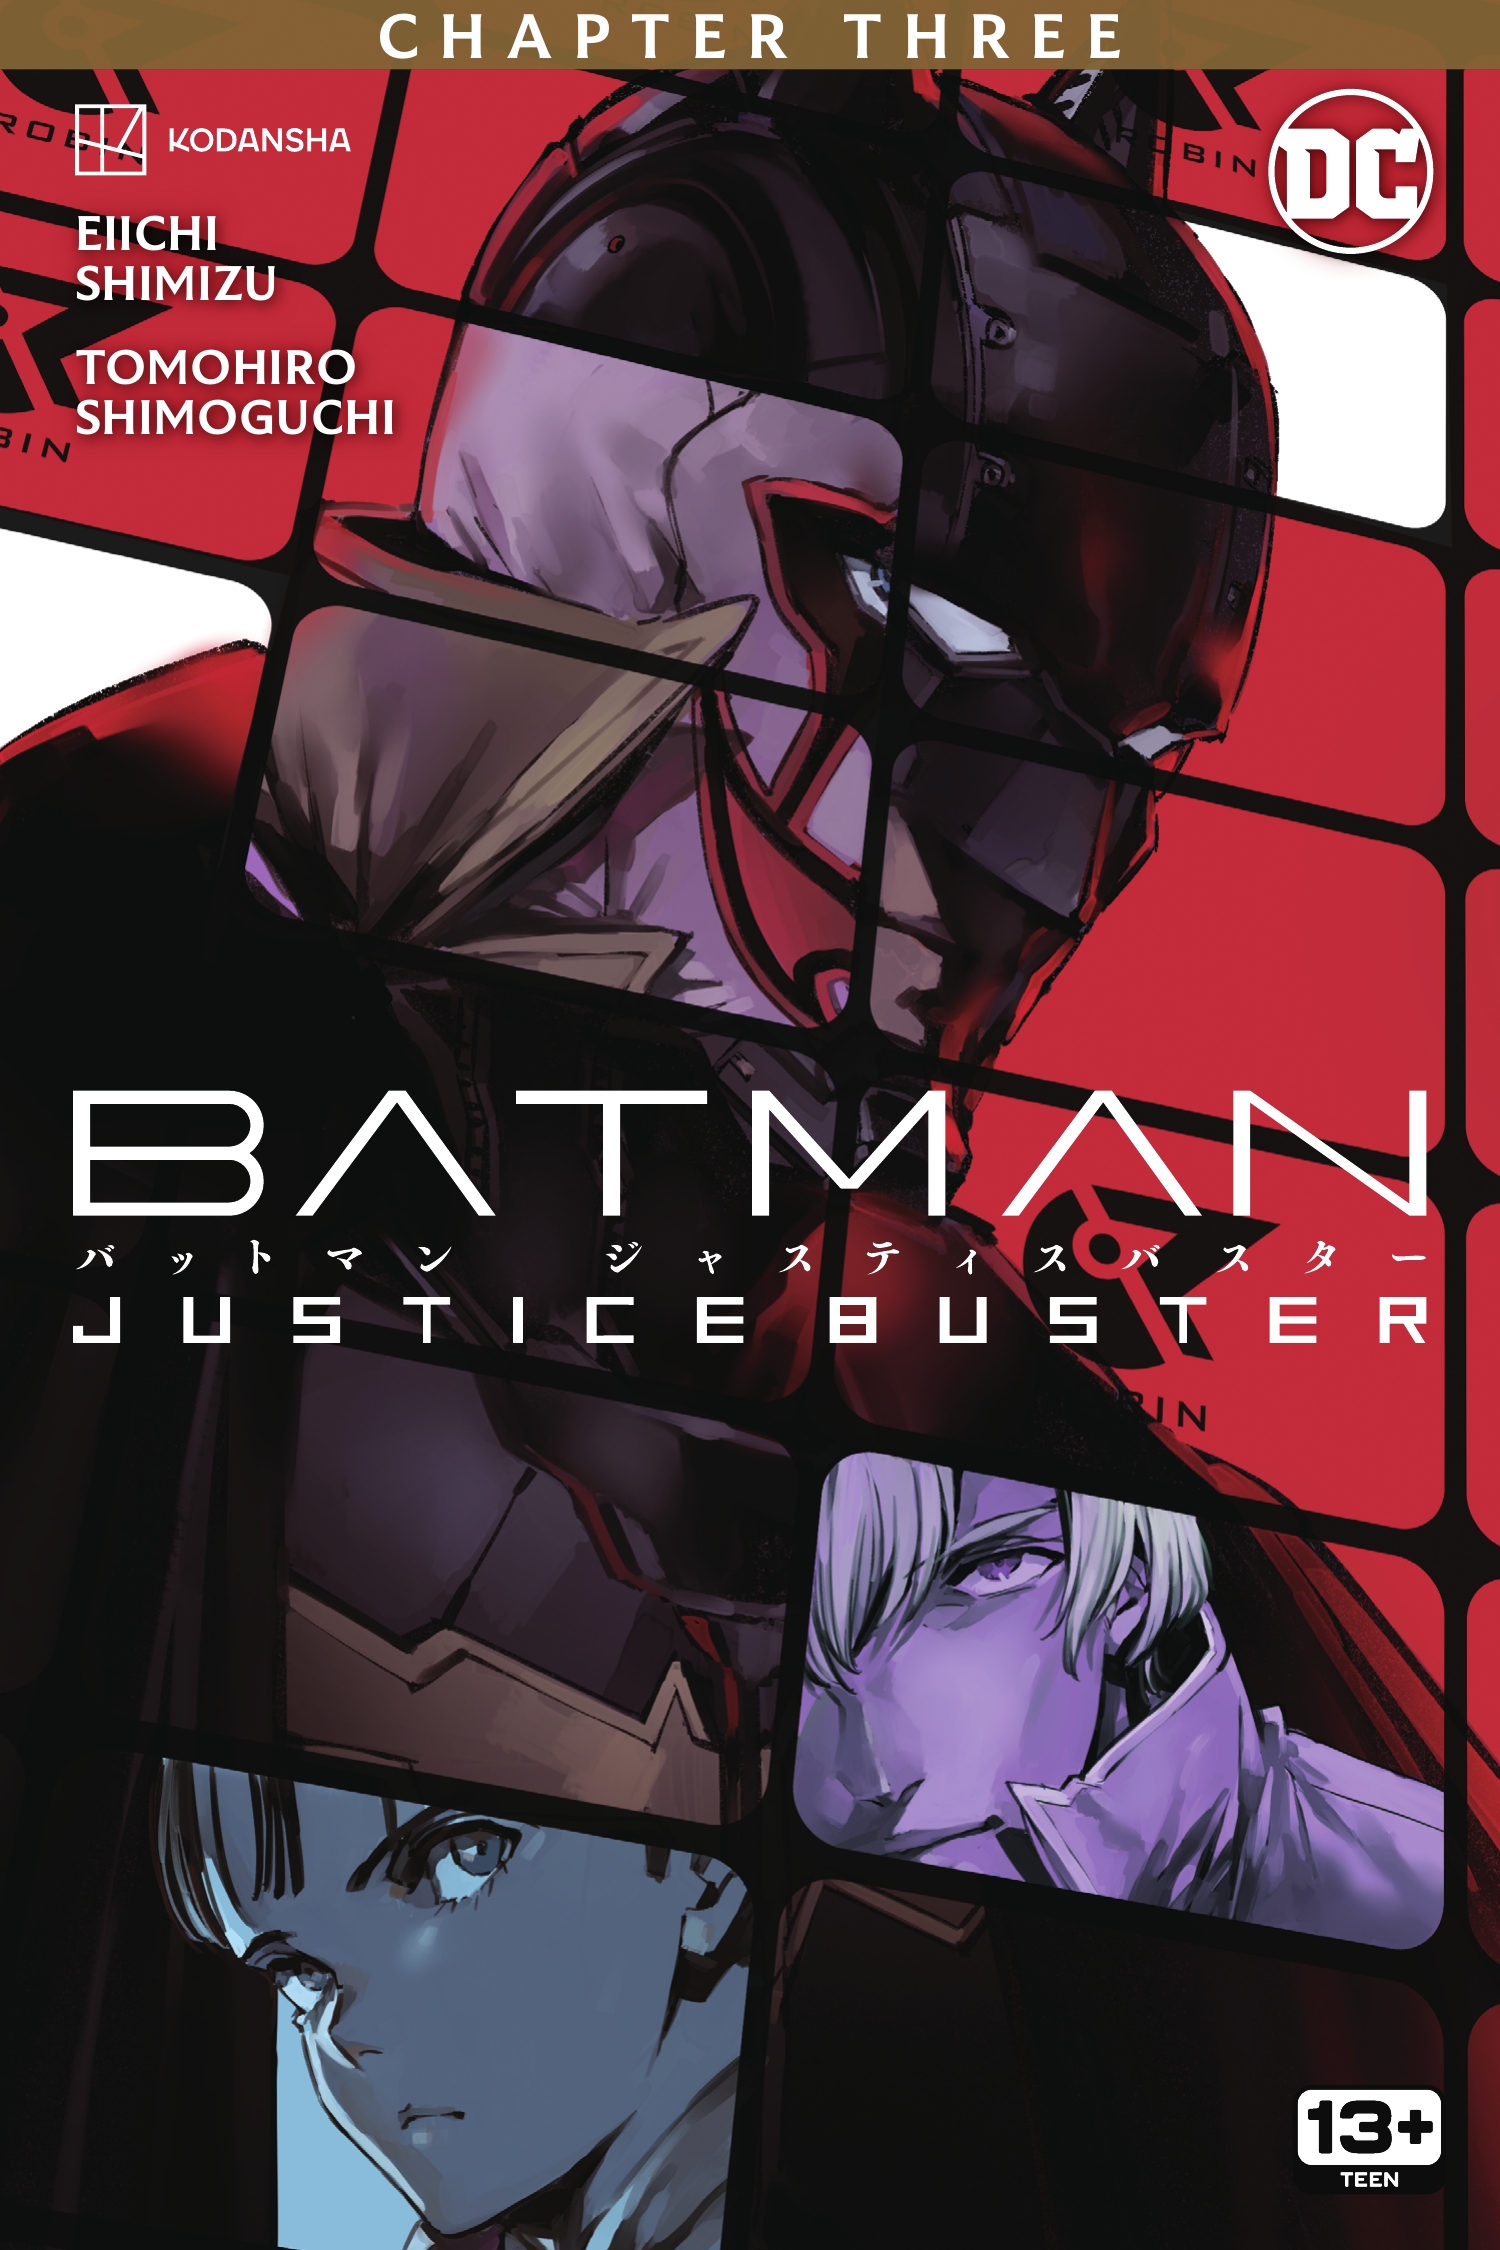 Read online Batman: Justice Buster comic -  Issue #3 - 1